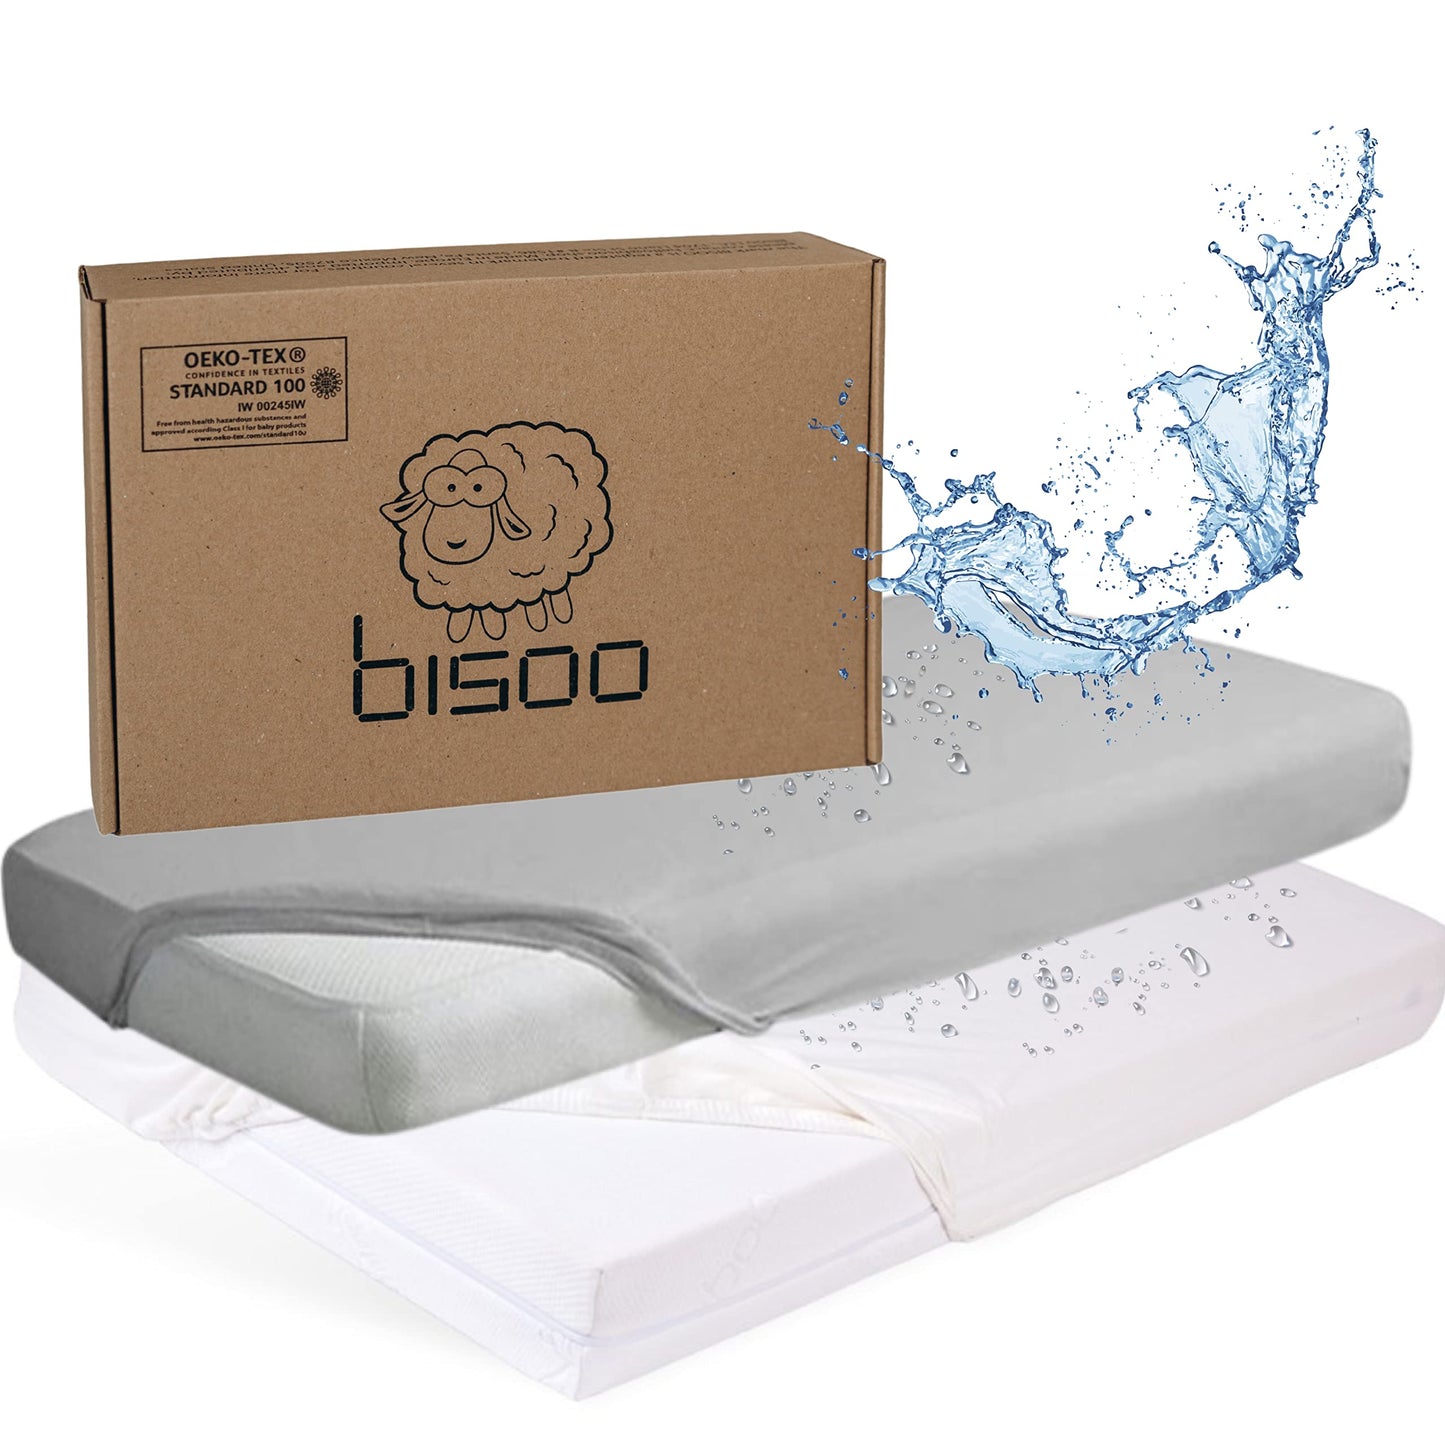 Bisoo Baby Cot Bed Waterproof Sheets Fitted 140 x 70 / 28x55 - Set of 2 Fitted Sheet Mattress Protector Made of 100% Jersey Oeko-Tex + PU - Toddler Cots Beds & Cribs - Soft & Silent - White & Gray